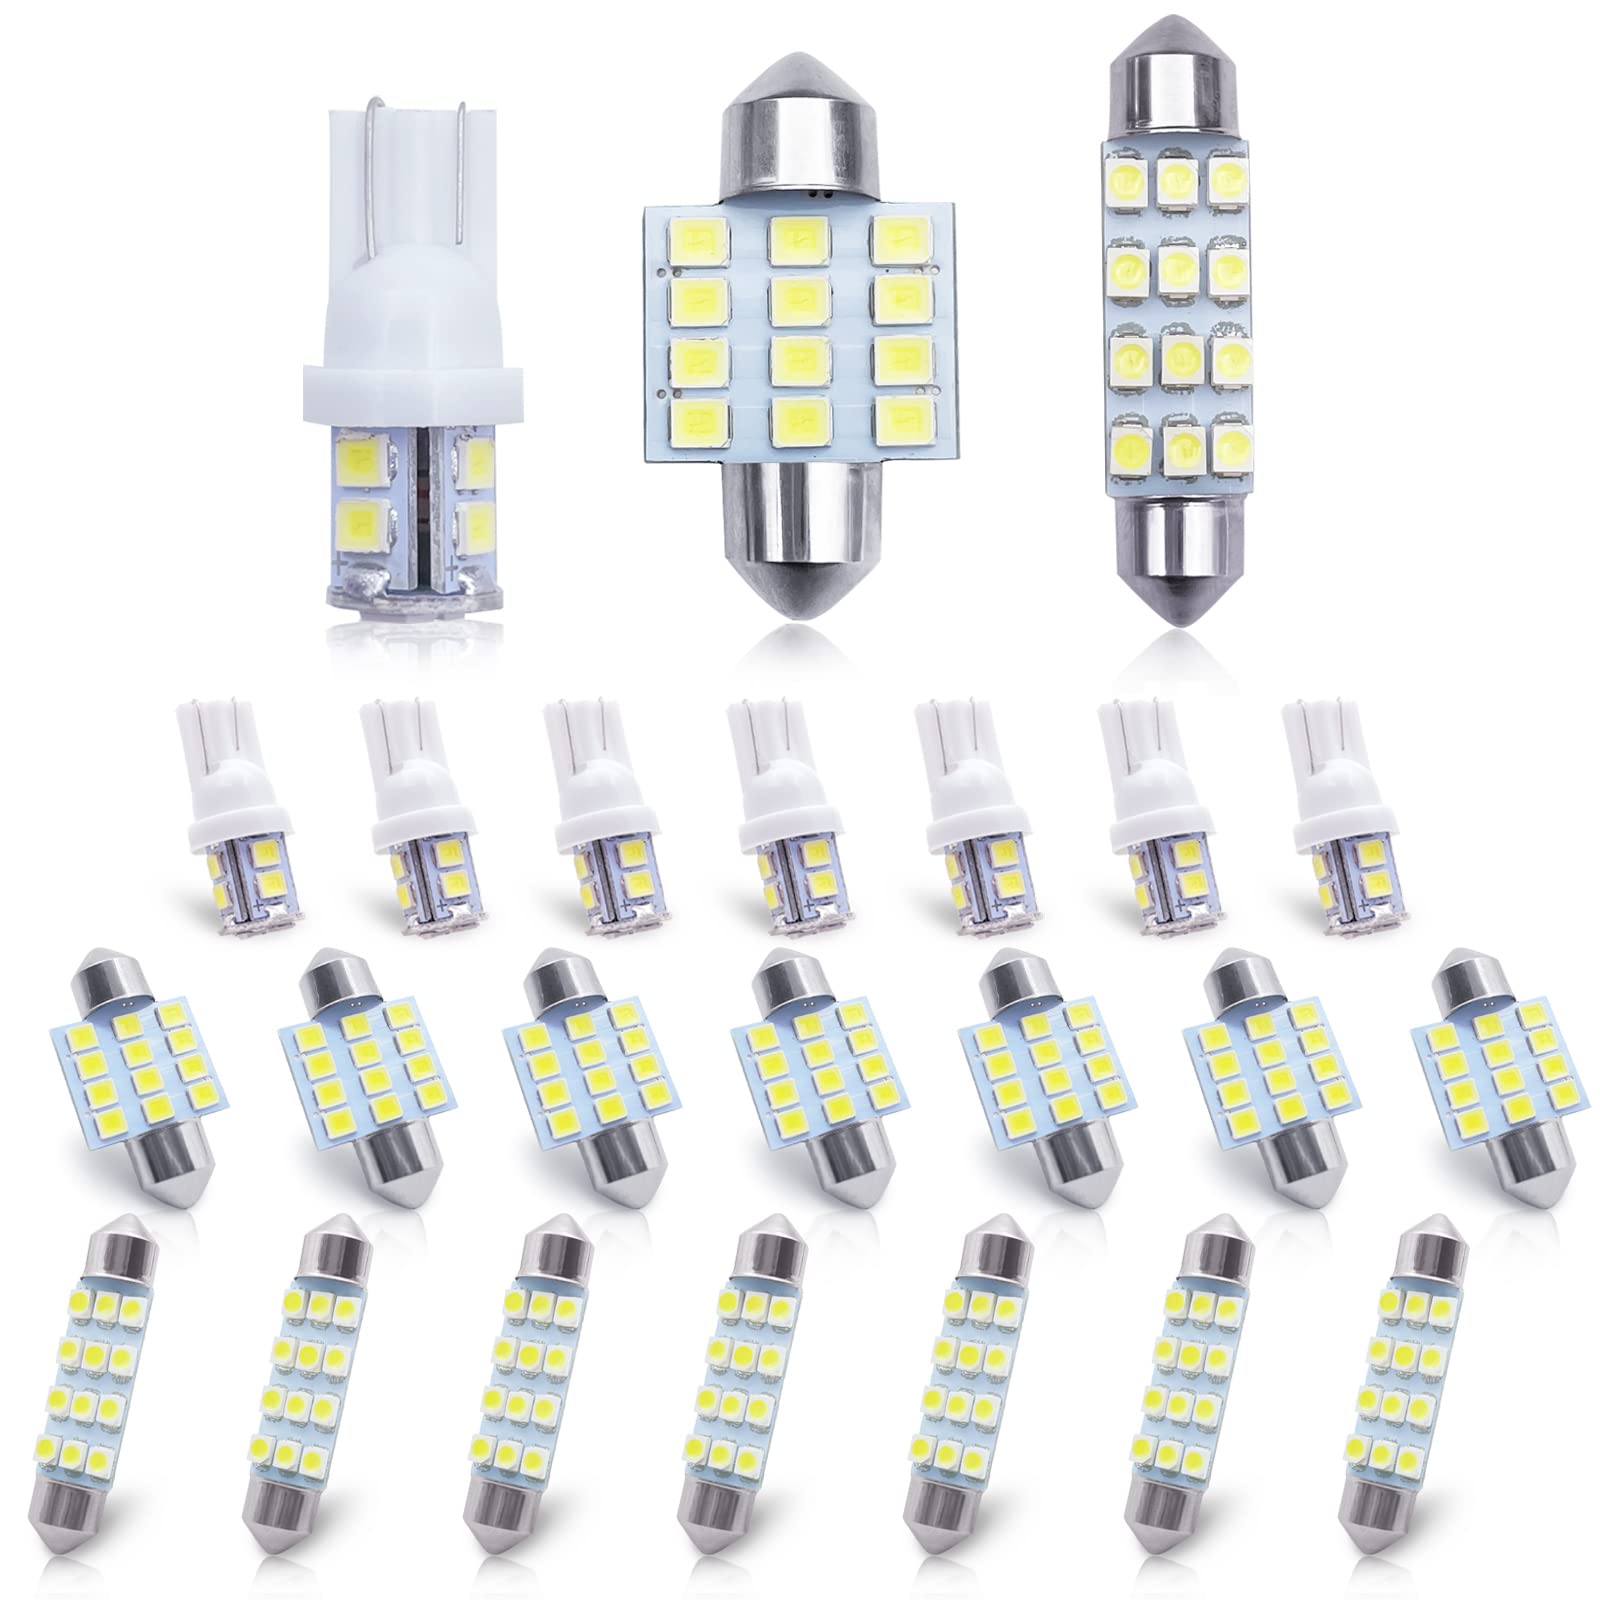 Wholesale toby's car light bulbs and led lights